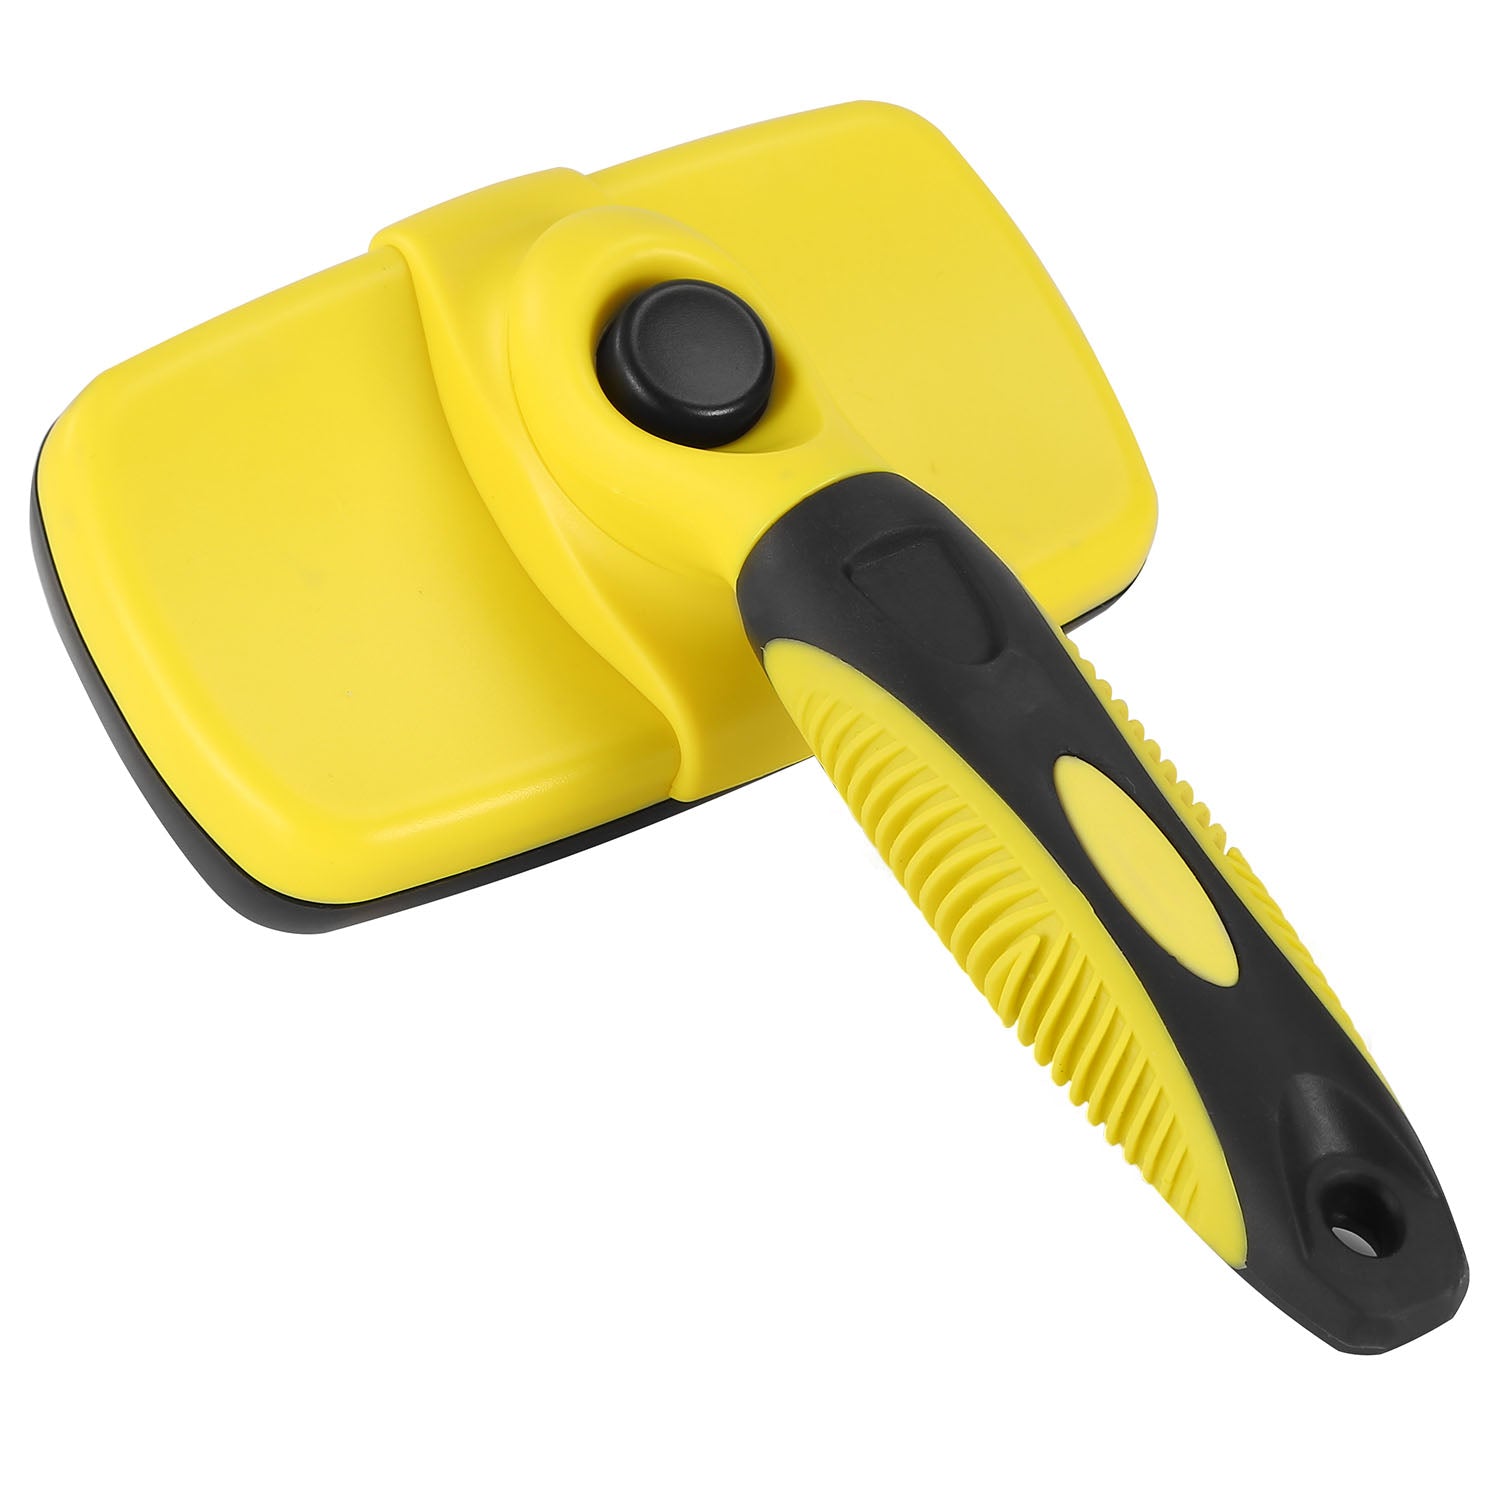 title:Self Cleaning Slicker Brush Pets Dogs Grooming Shedding Tools Pet Hair Grooming Remover;color:Yellow